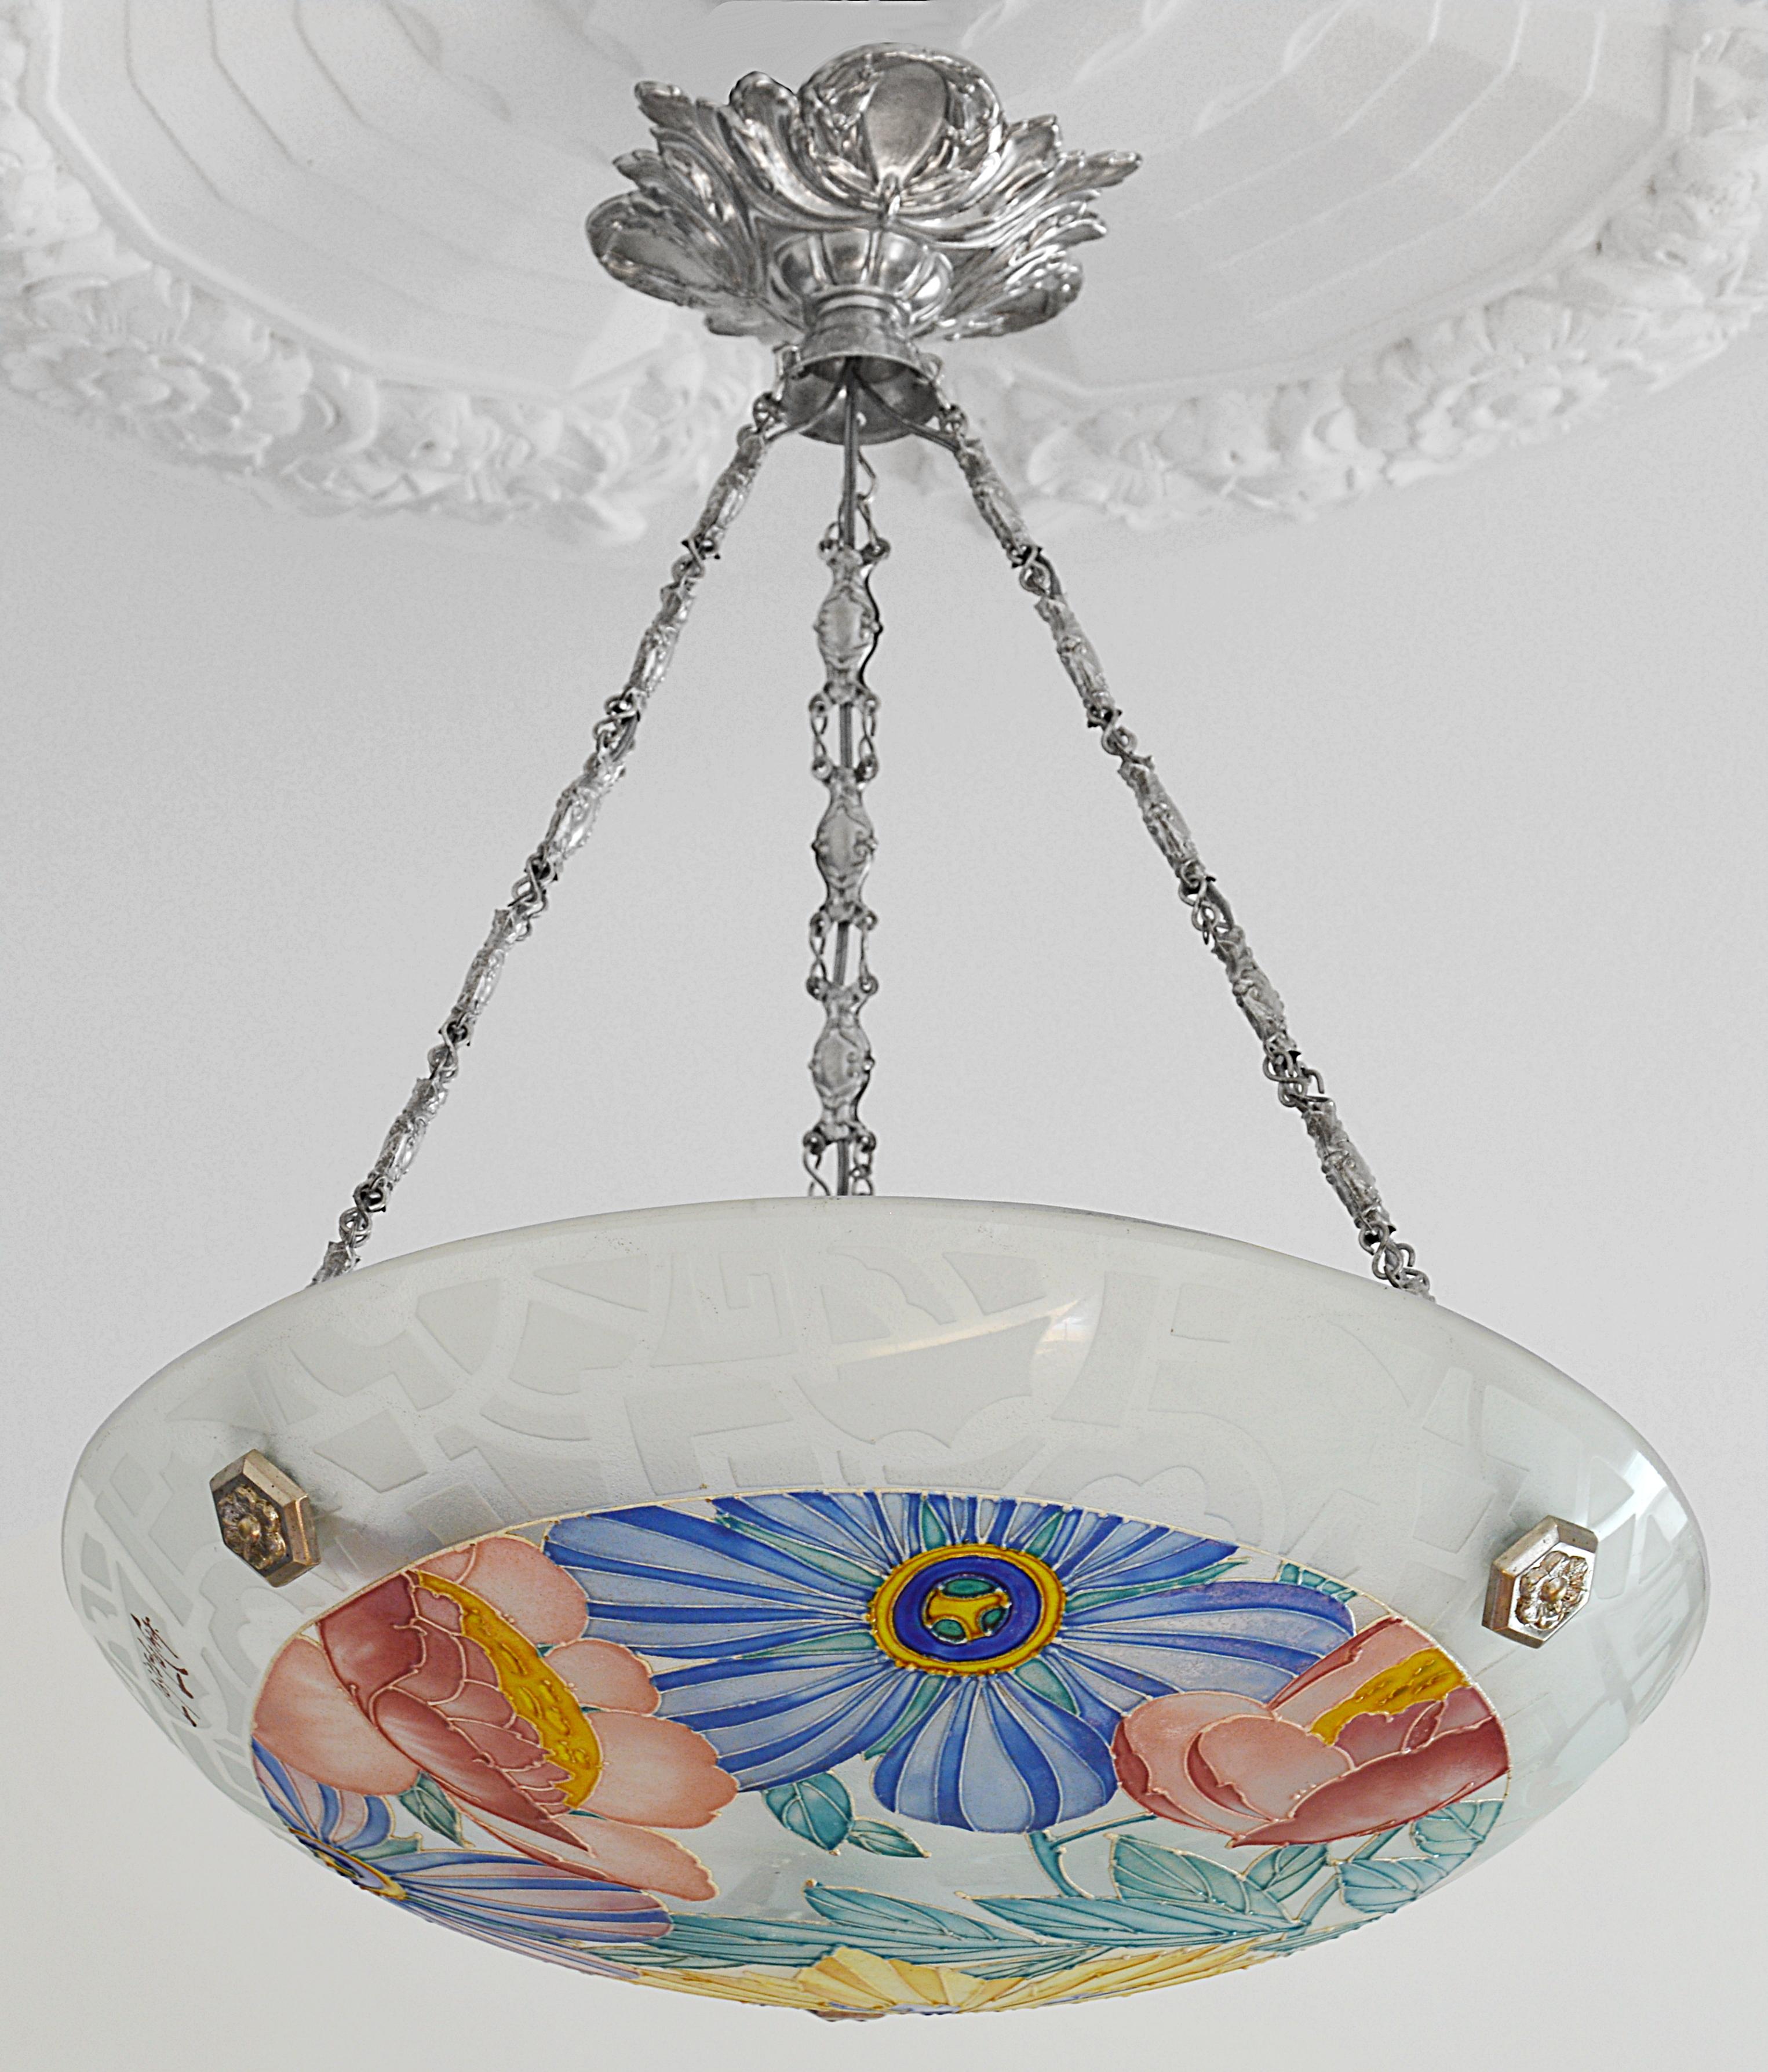 French Art Deco chandelier by Loys Lucha, Nancy and Billancourt (Paris), ca.1925. Enameled glass shade hung at its original stamped plated metal fixture. The edge of the shade is acid-etched. Signed 